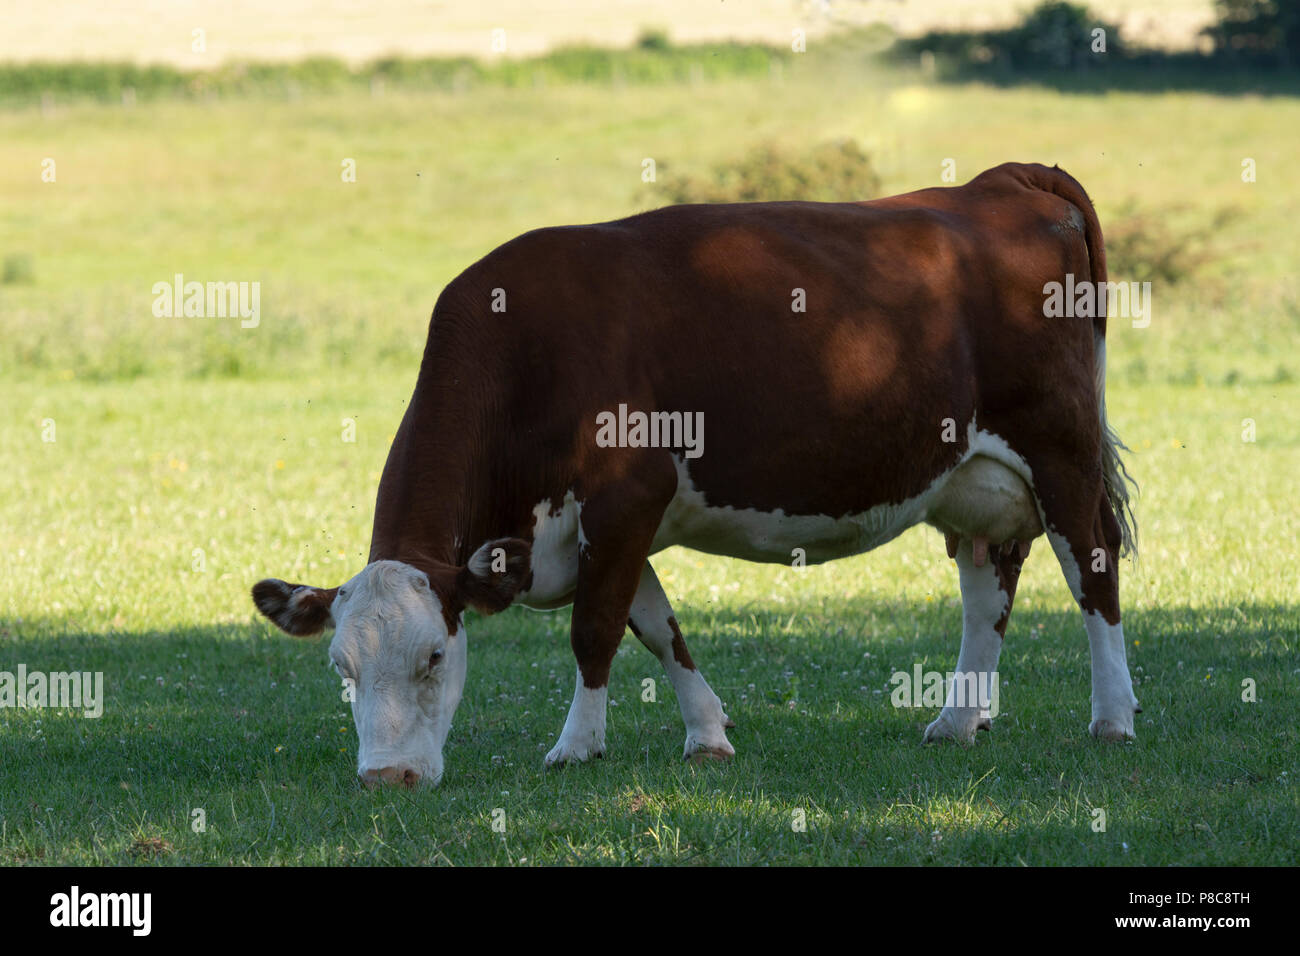 Hereford cow grazing on the grass early in the morning. Stock Photo